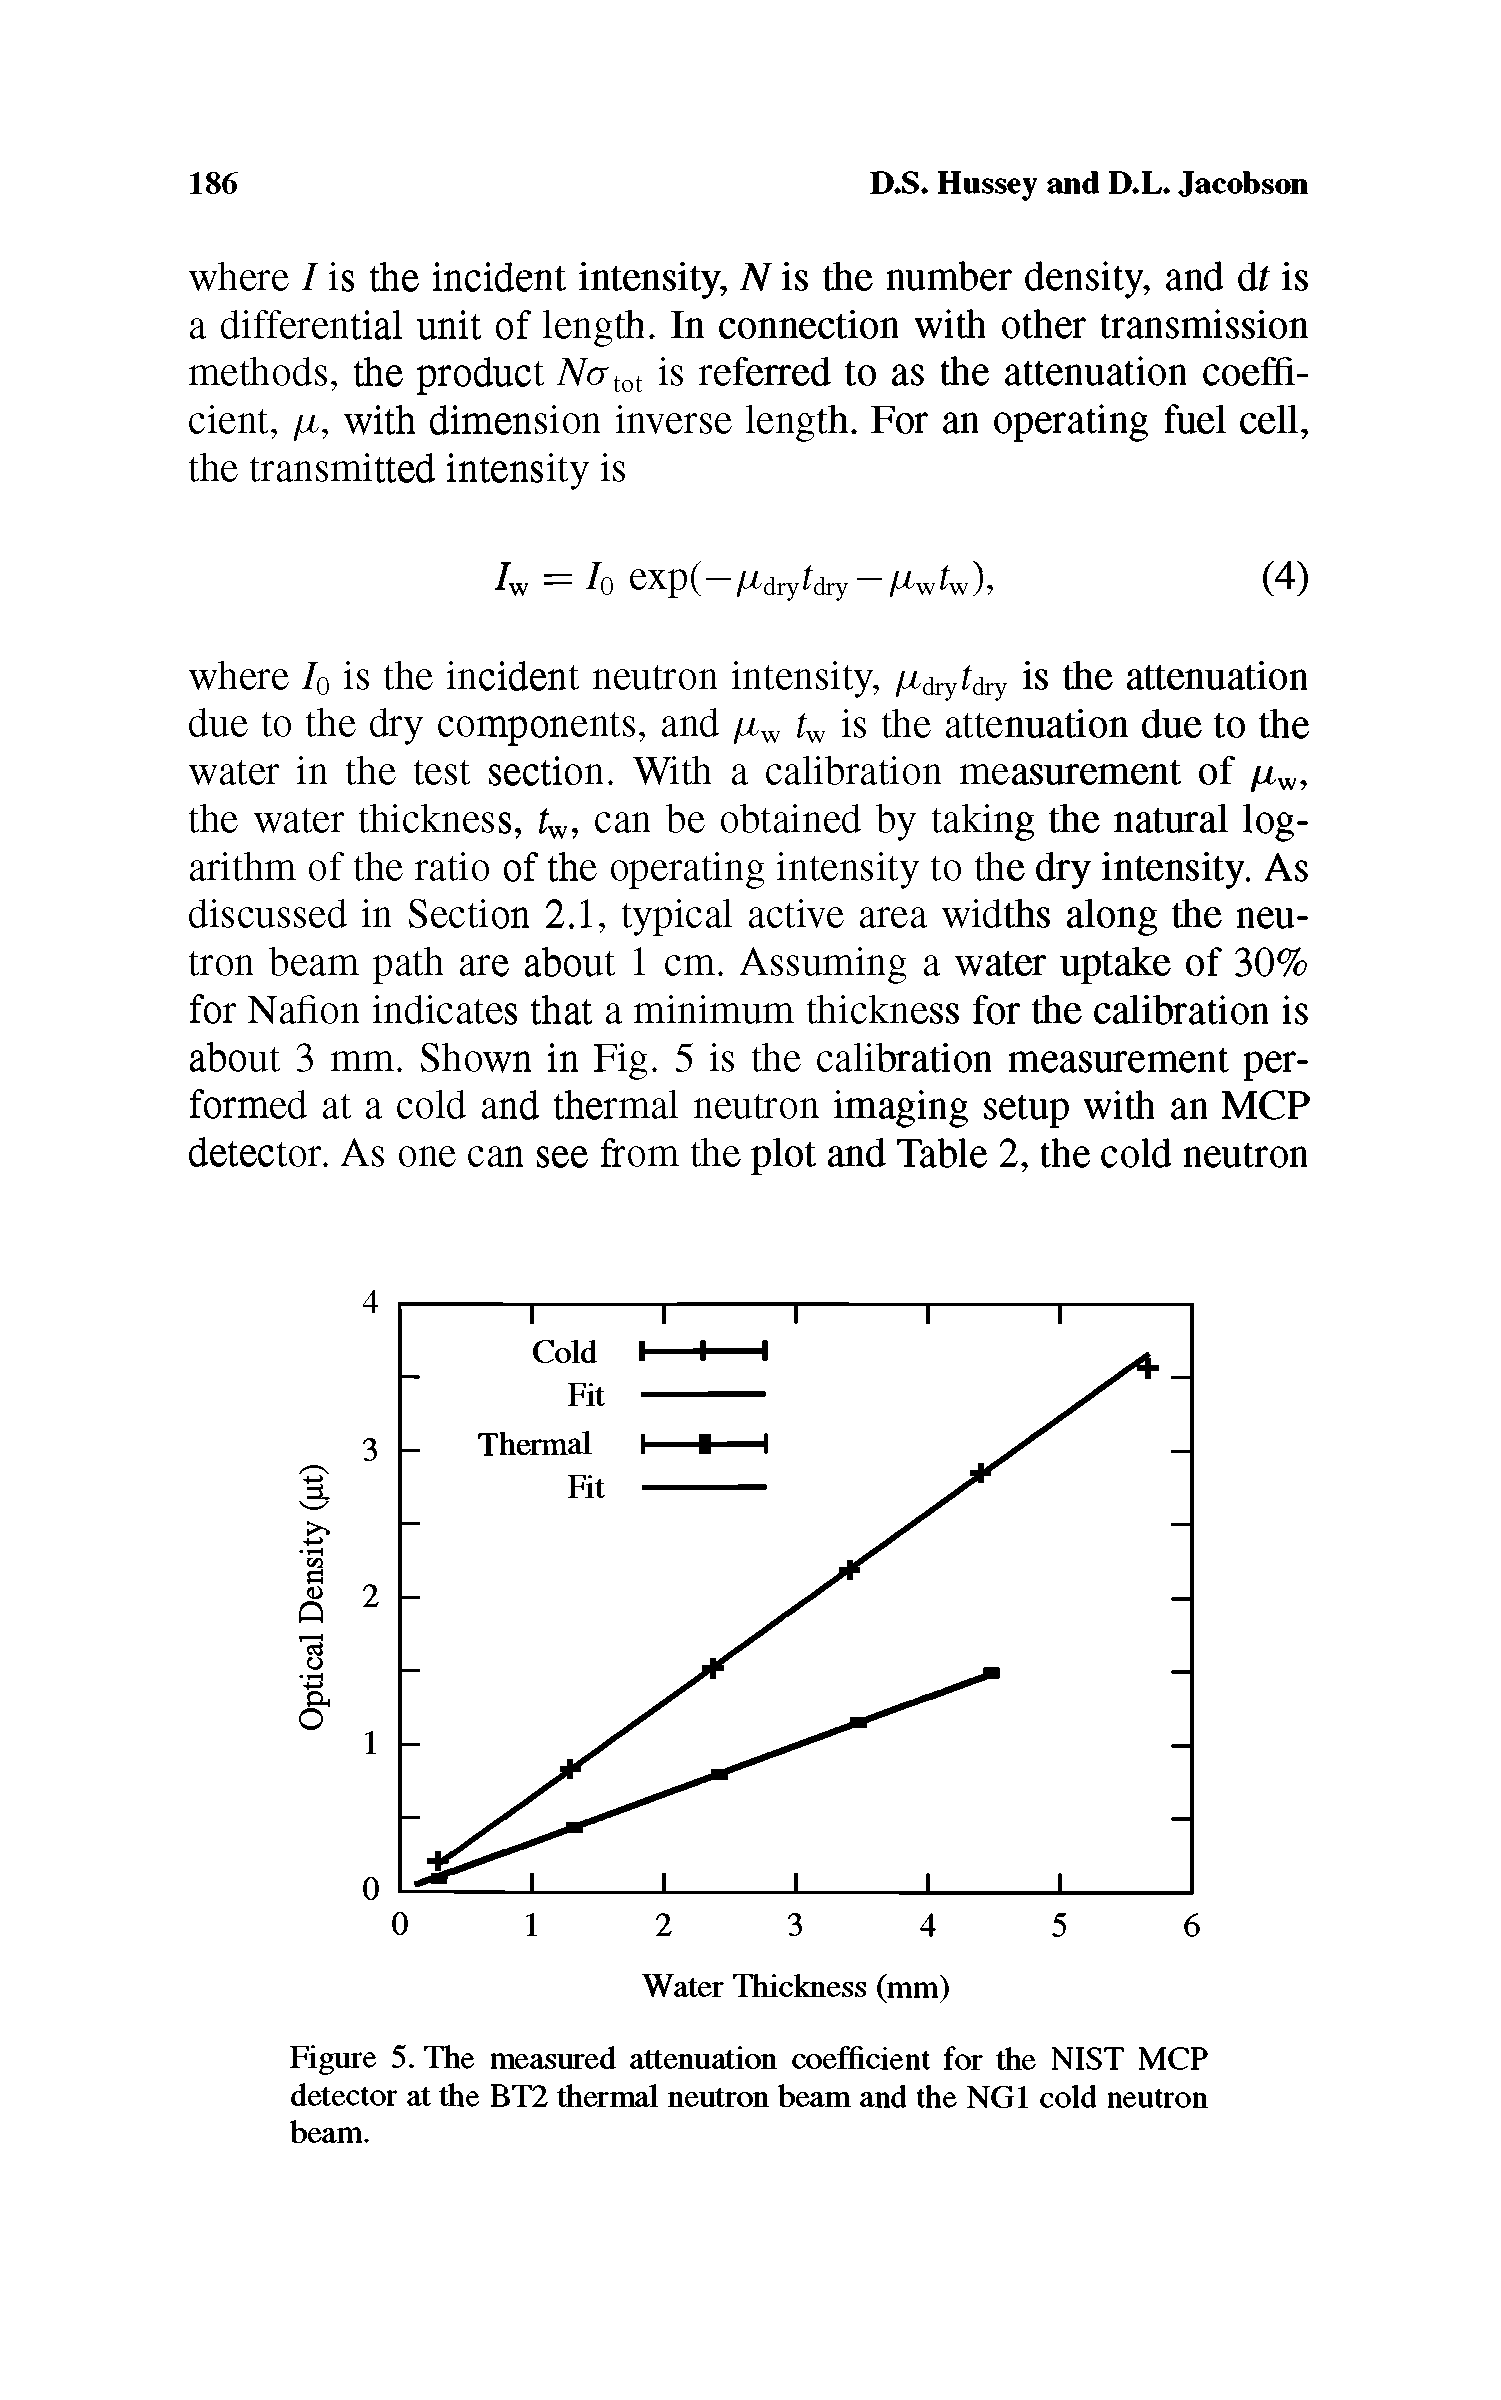 Figure 5. The measured attenuation coefficient for die NIST MCP detector at die BT2 thermal neutron beam and the NG1 cold neutron beam.